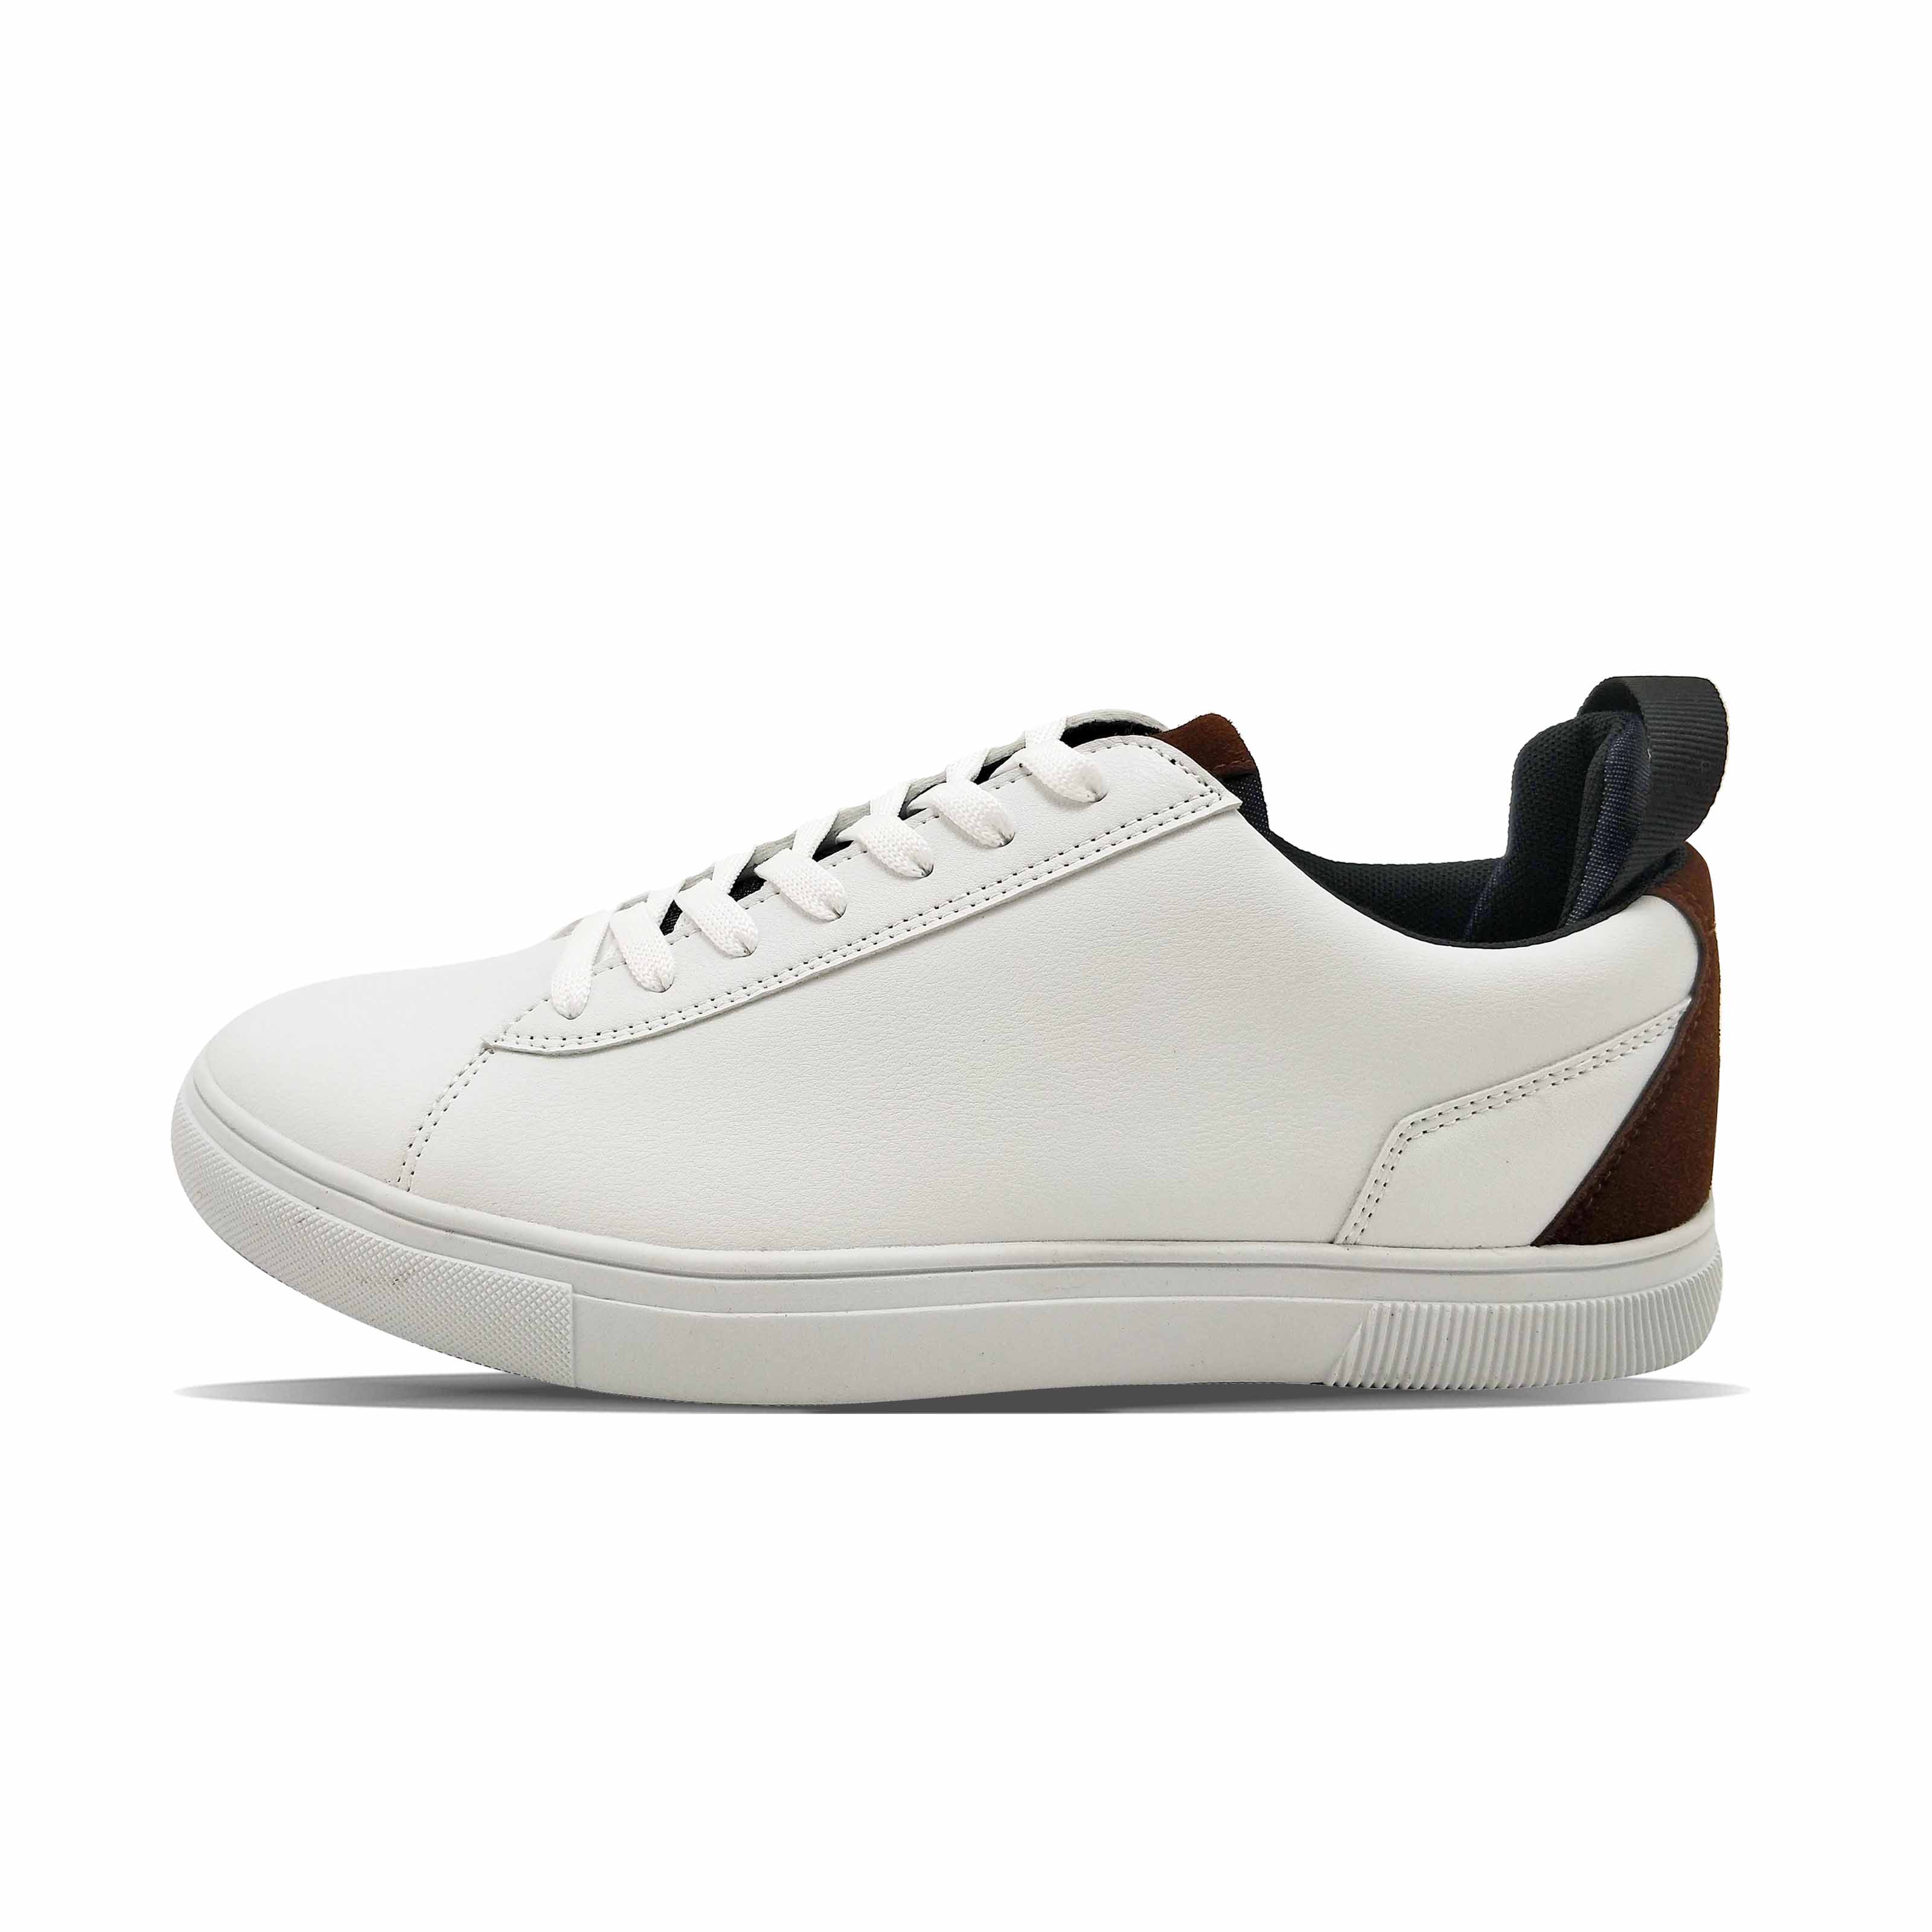 White men’s simple business casual board shoes